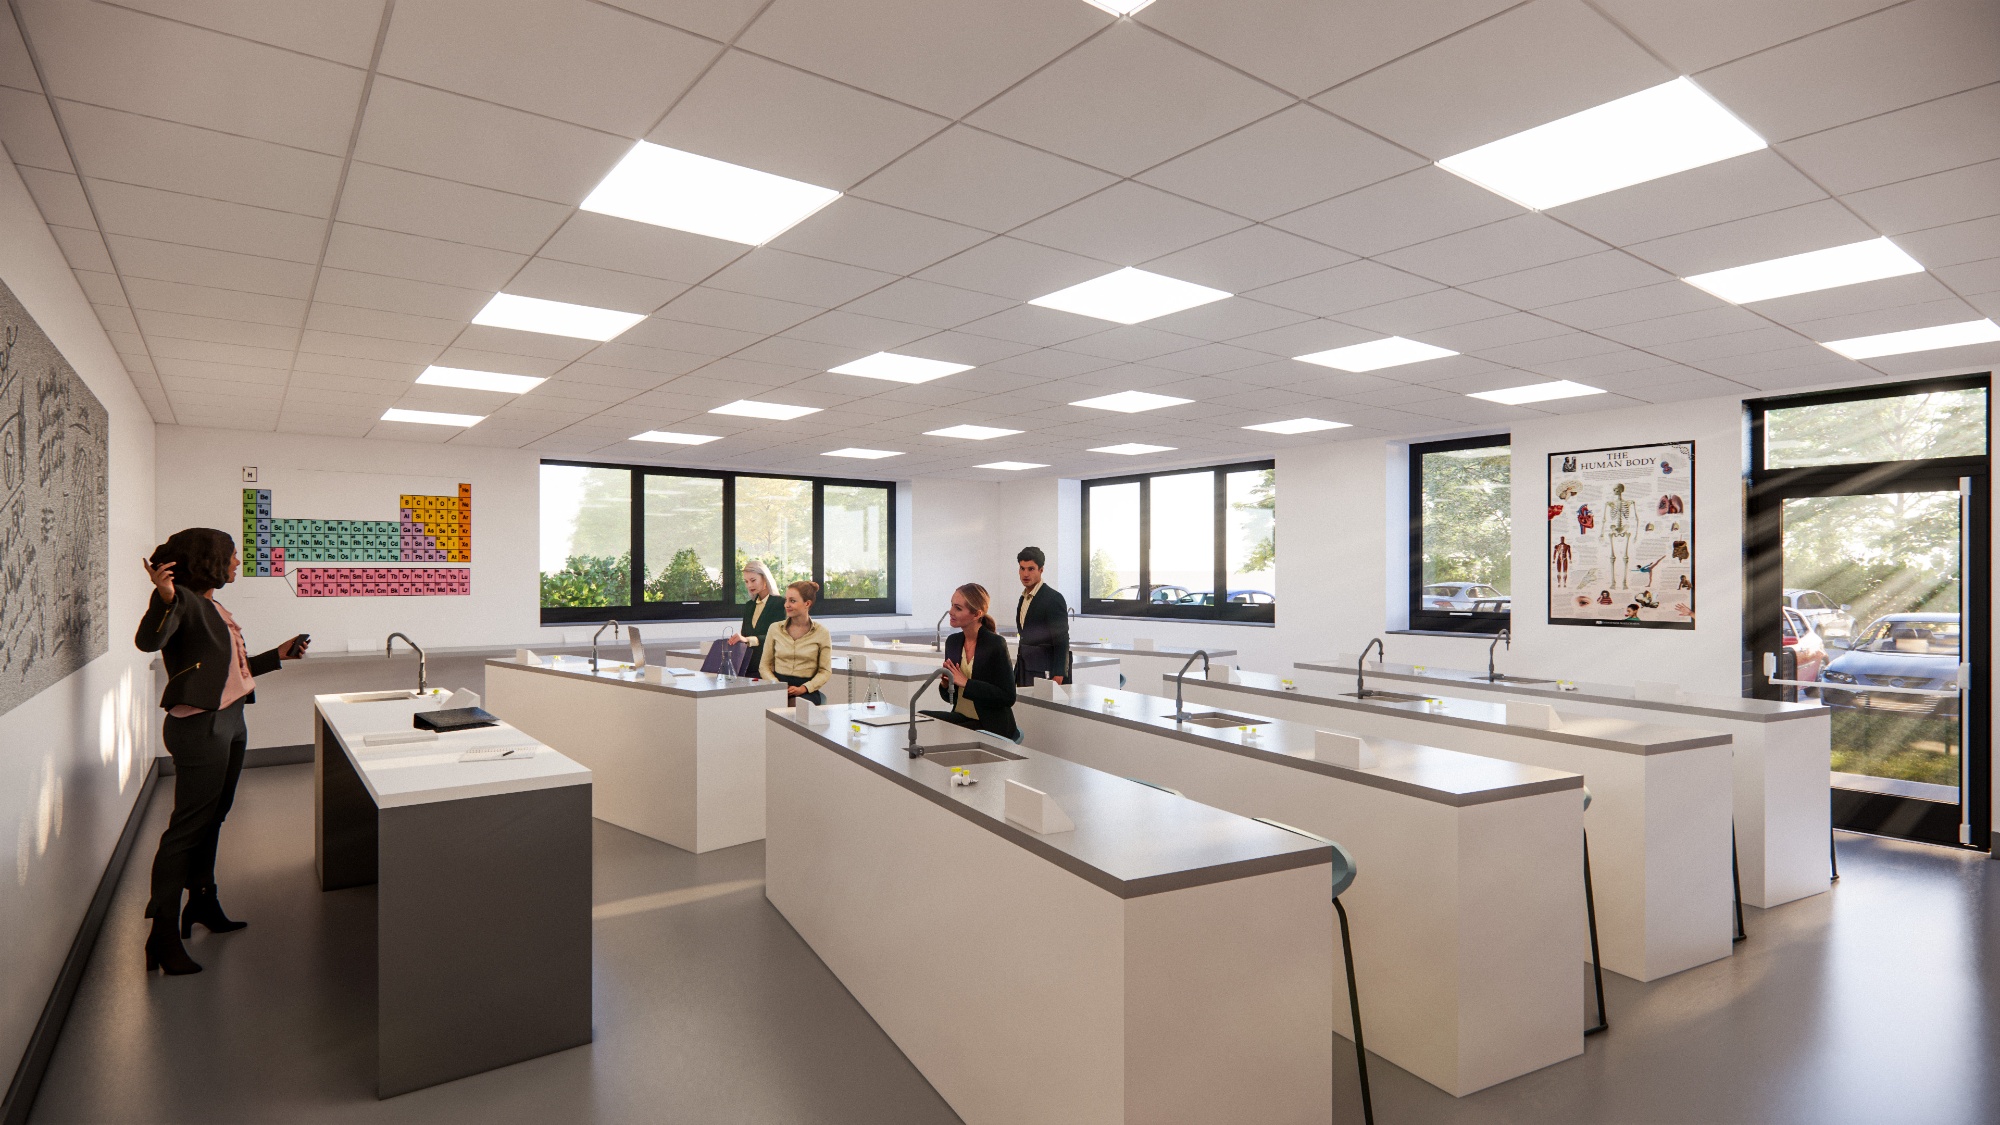 New science block at Ribston Hall - inside of of the science labs